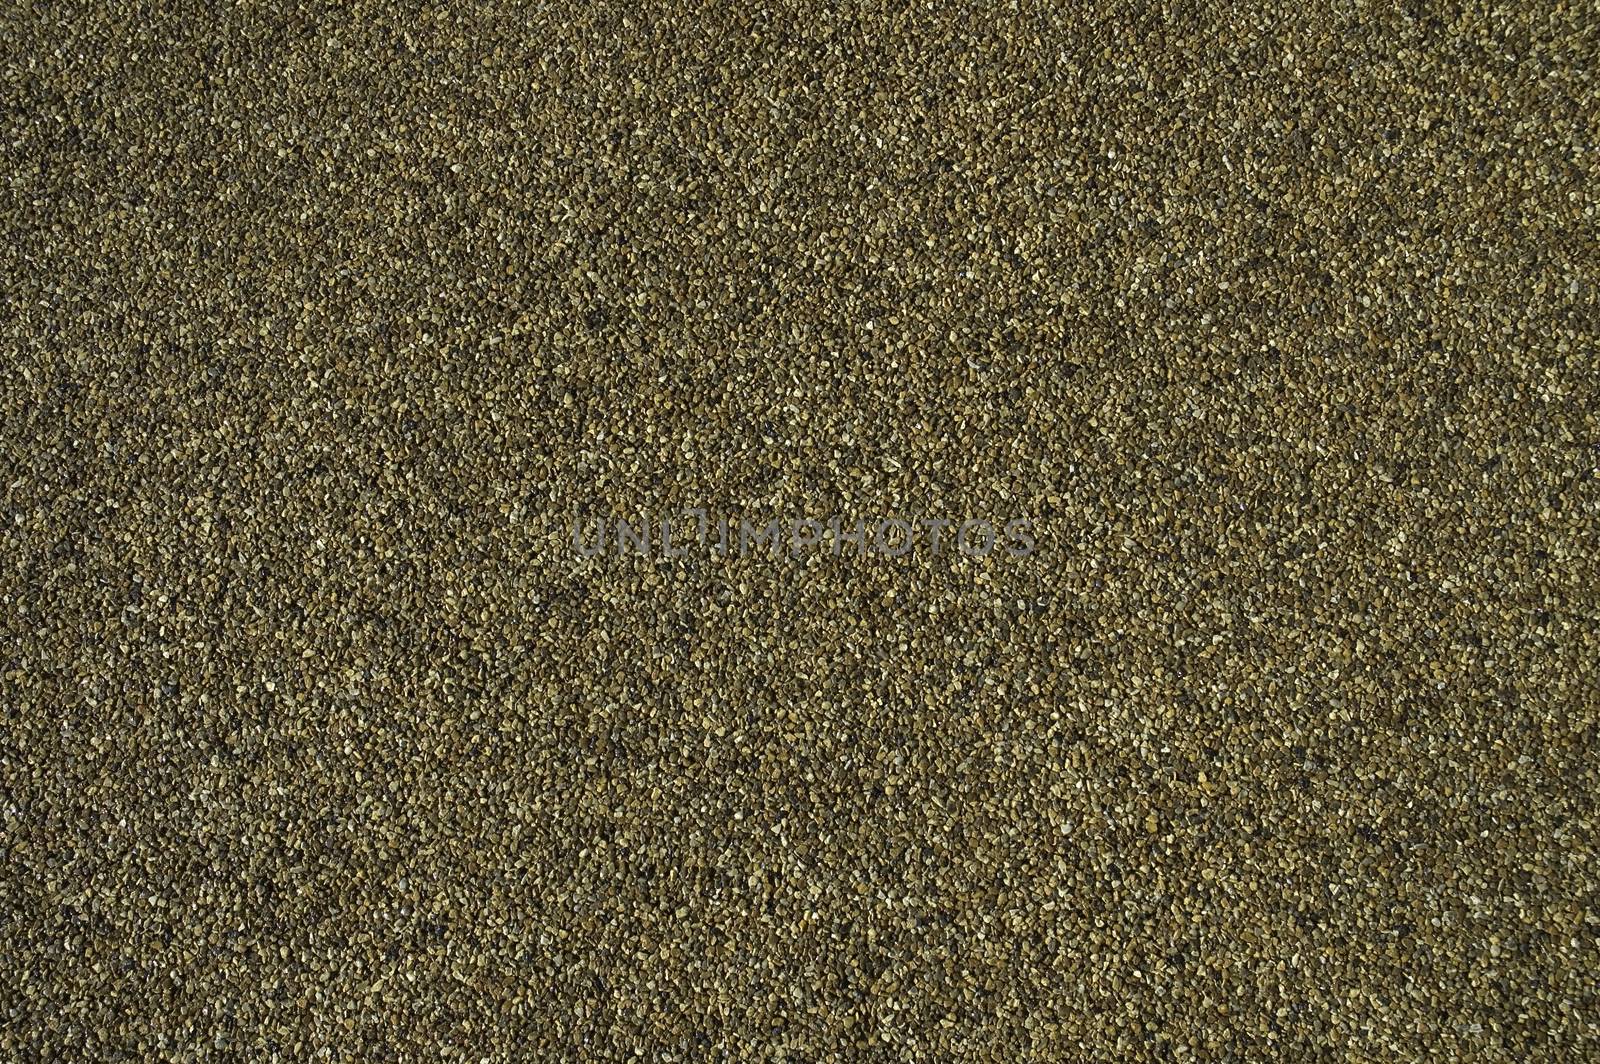 Gravel Background fine by TimAwe